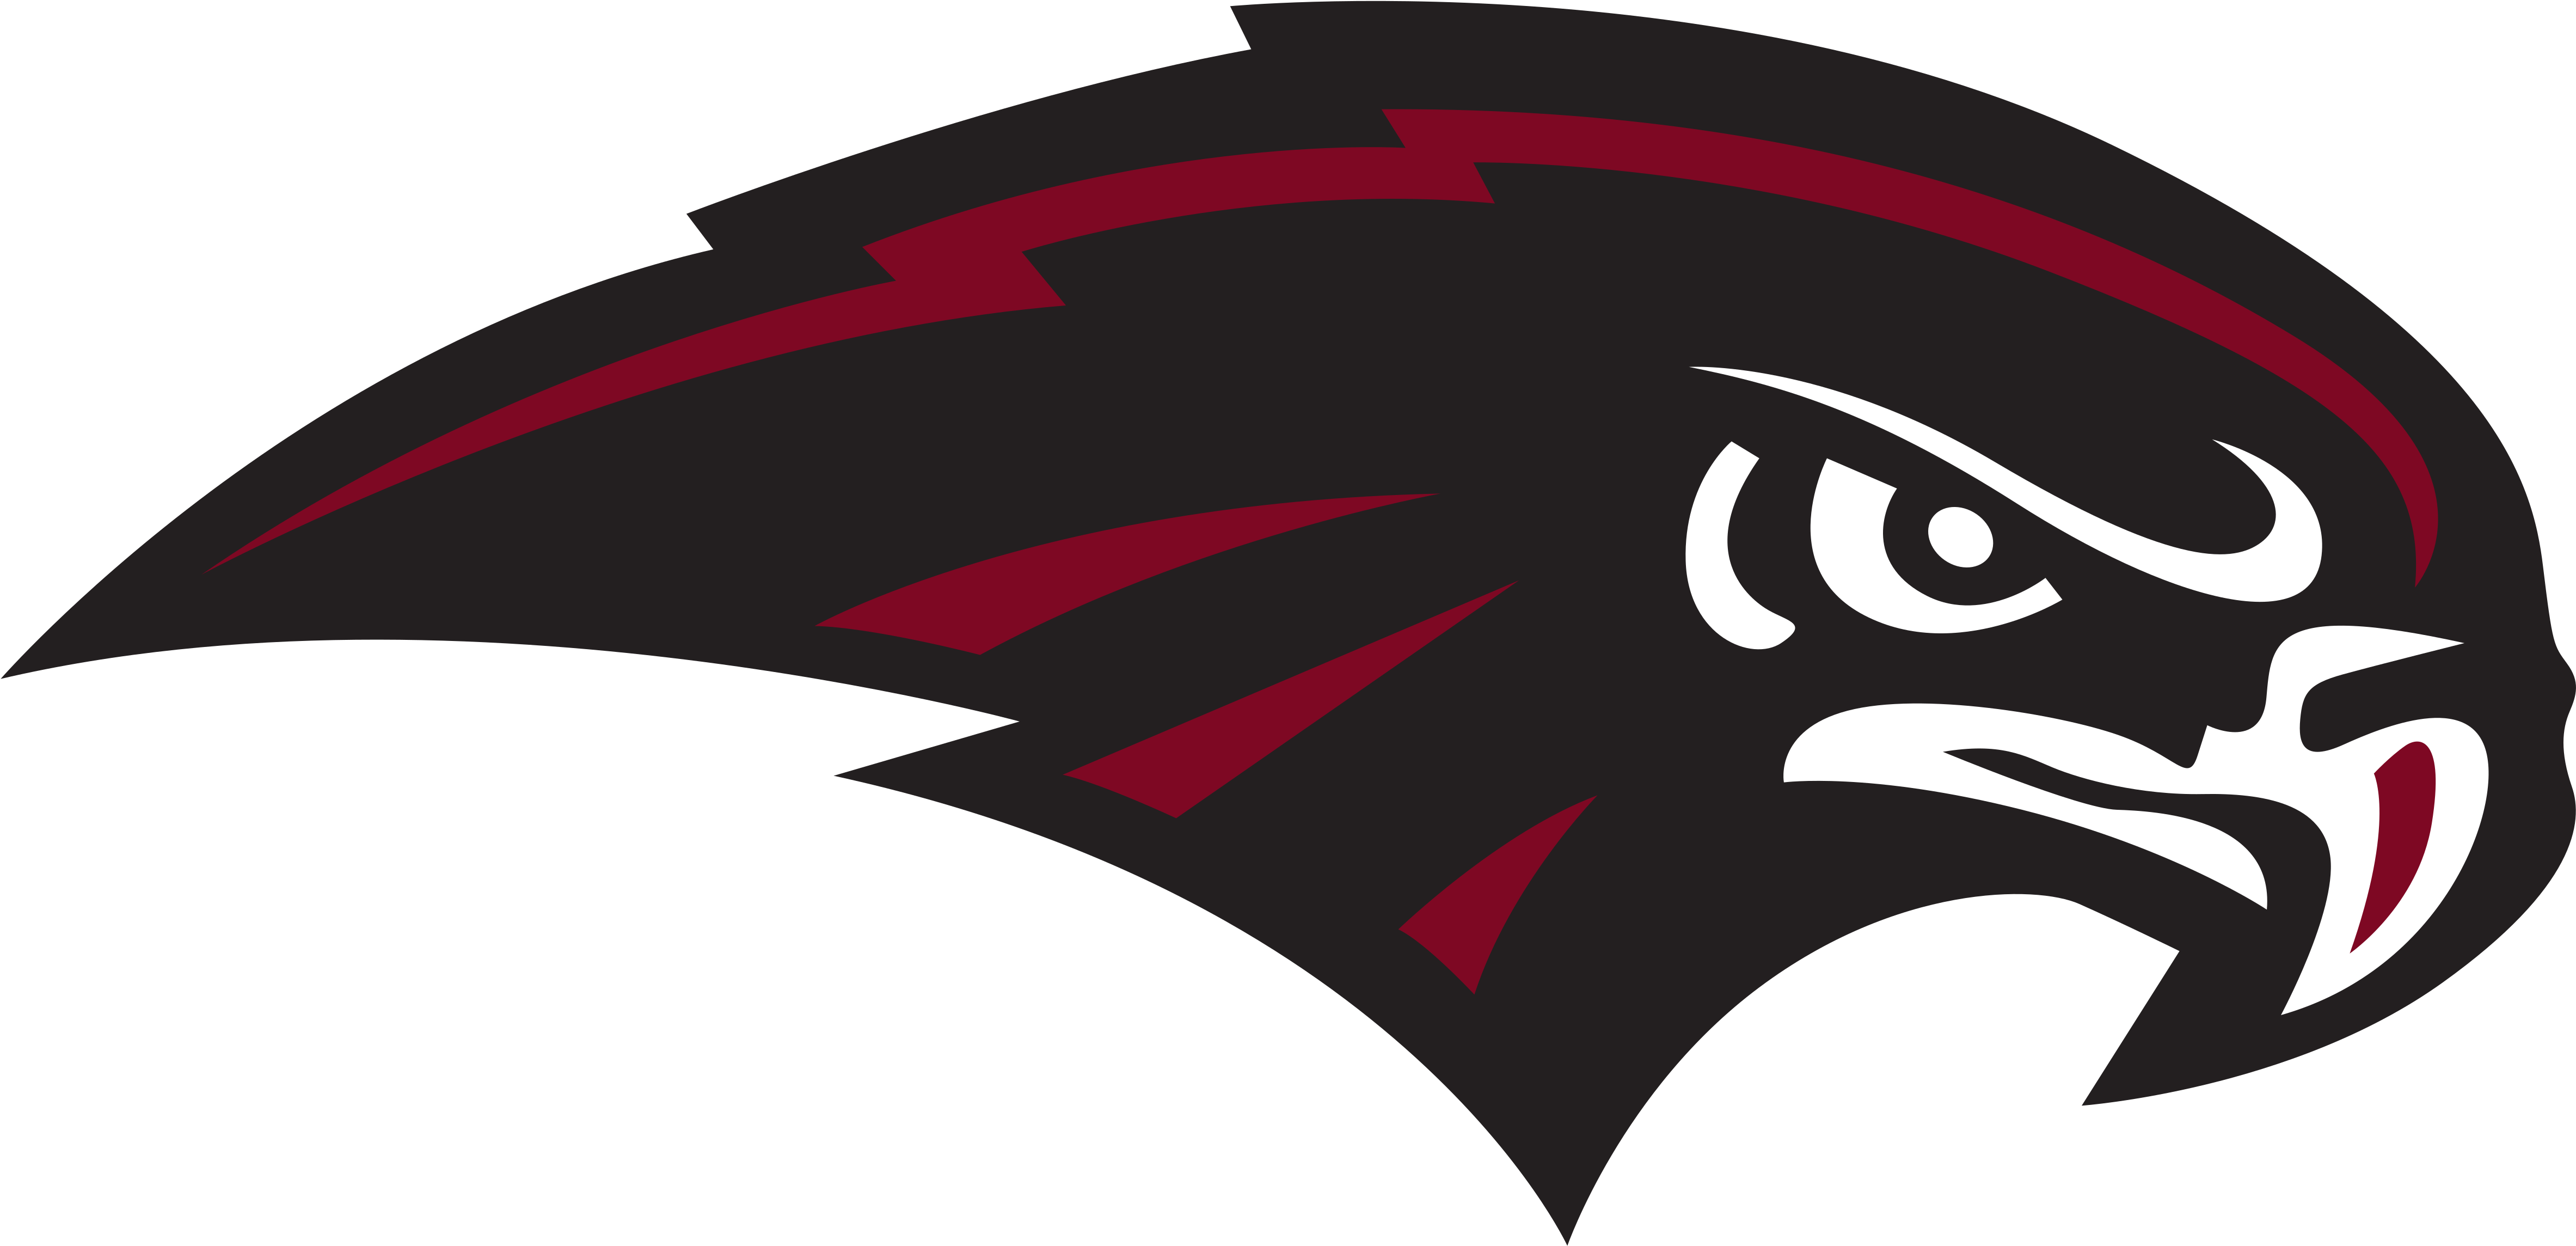 Horizon High School Flying Hawks logo in magenta, white on a black field with transparent background.